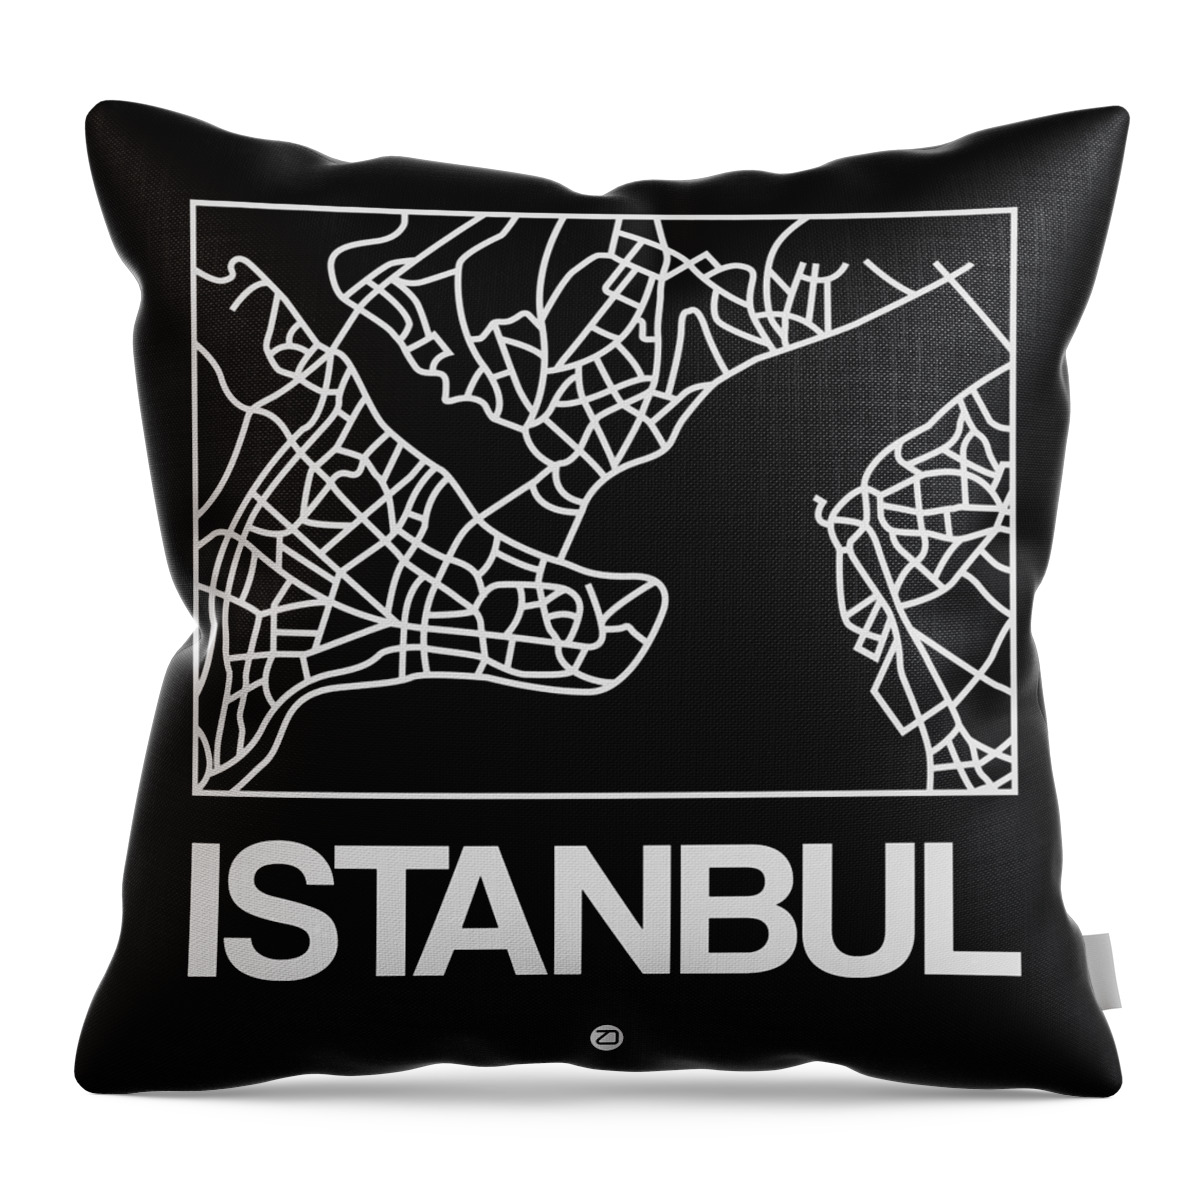 Istanbul Throw Pillow featuring the digital art Black Map of Istanbul by Naxart Studio